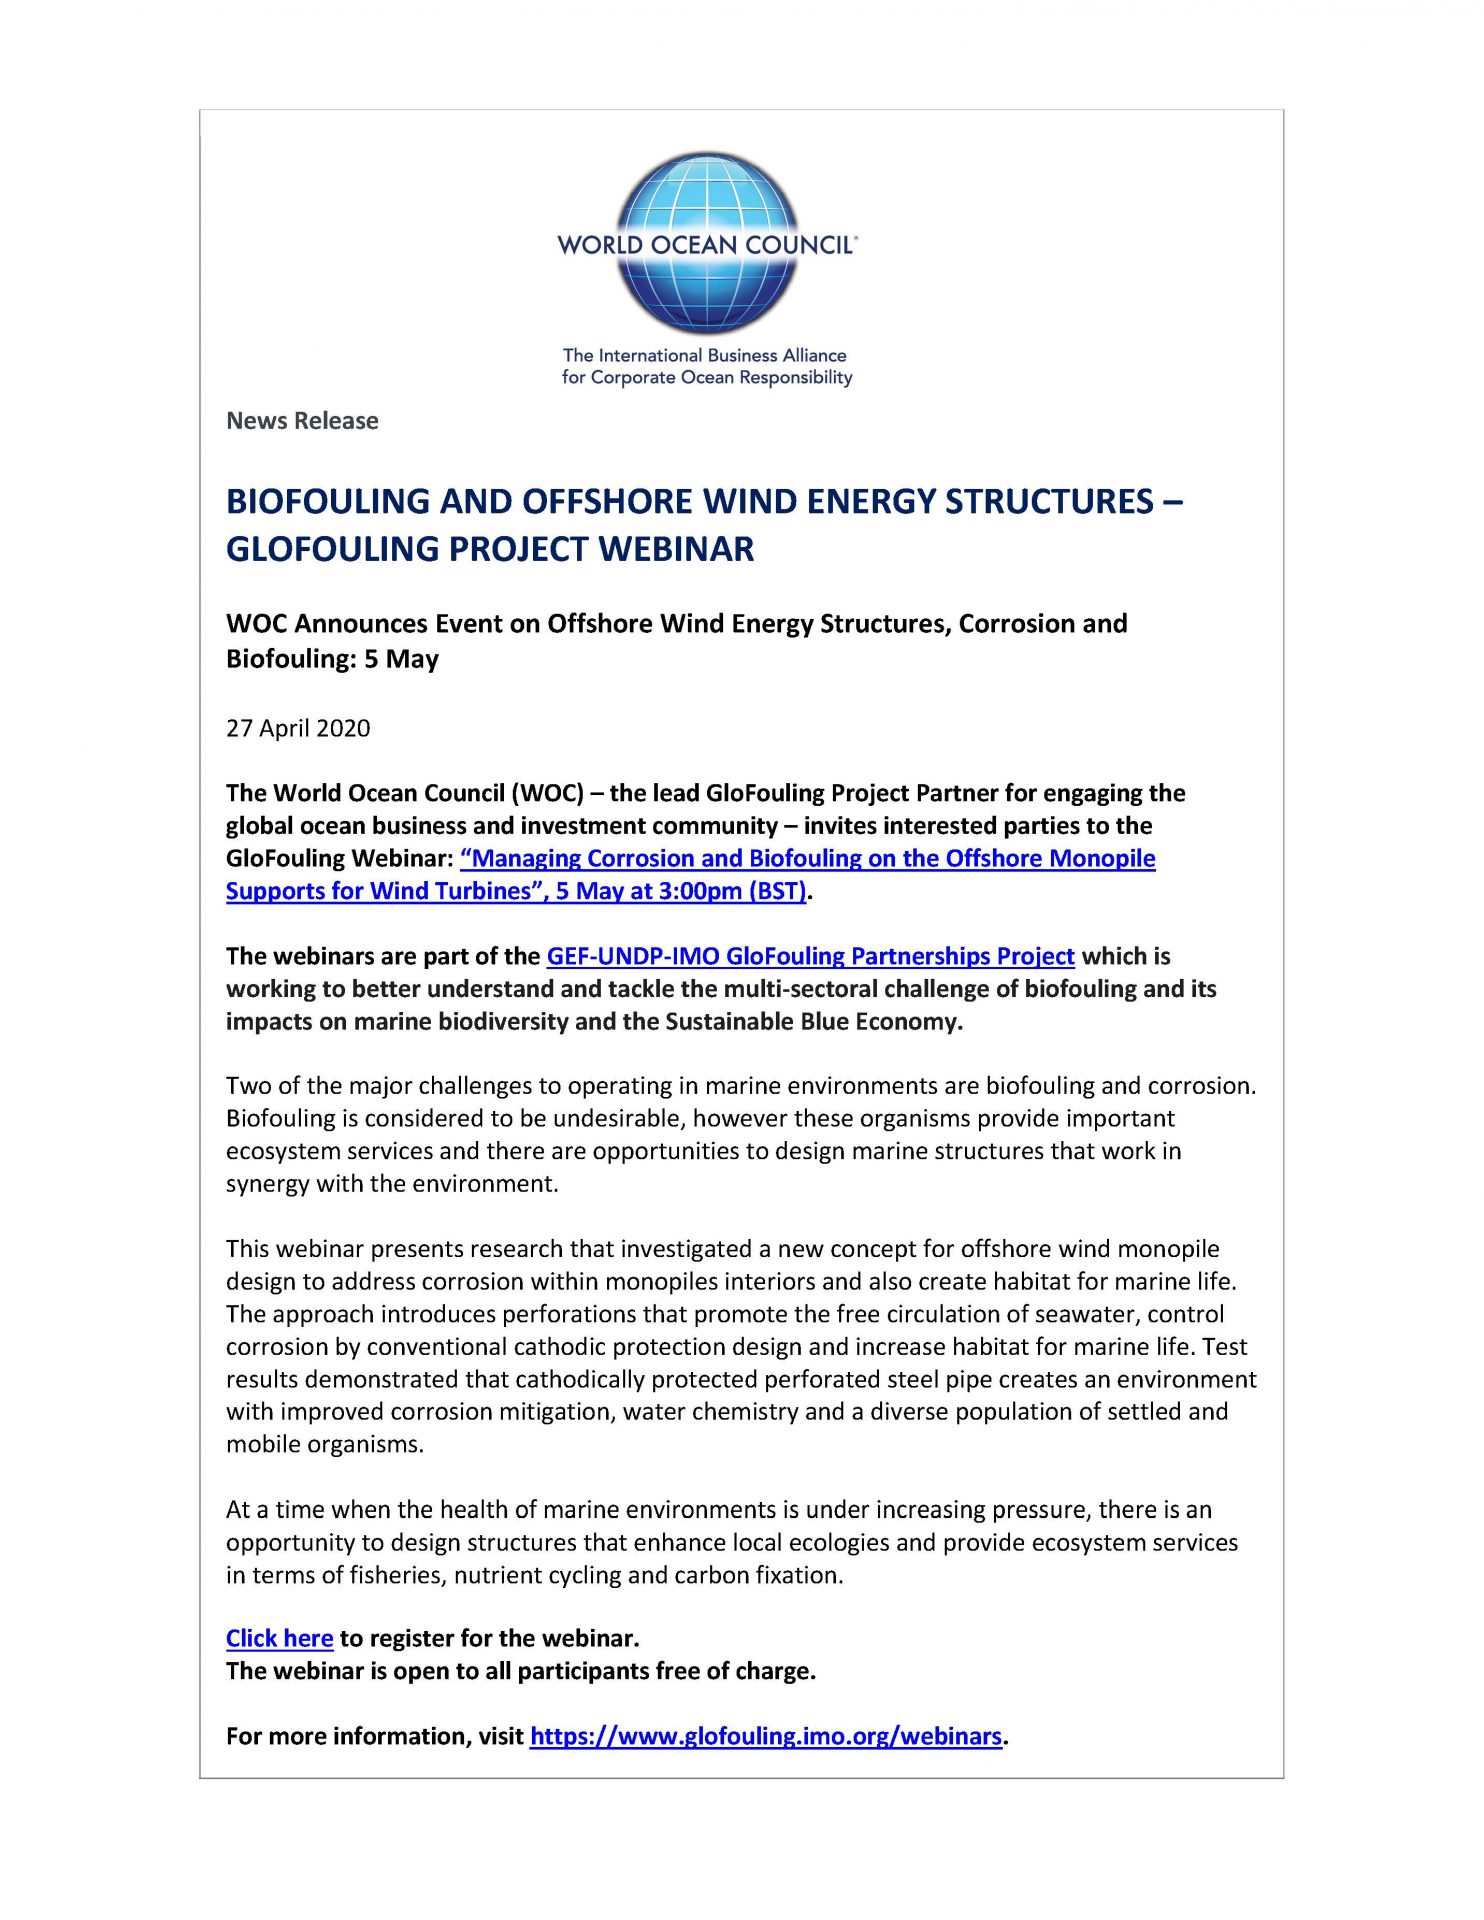 Biofouling and Offshore Wind Energy Structures - GloFouling Project Webinar - 27 April 2020